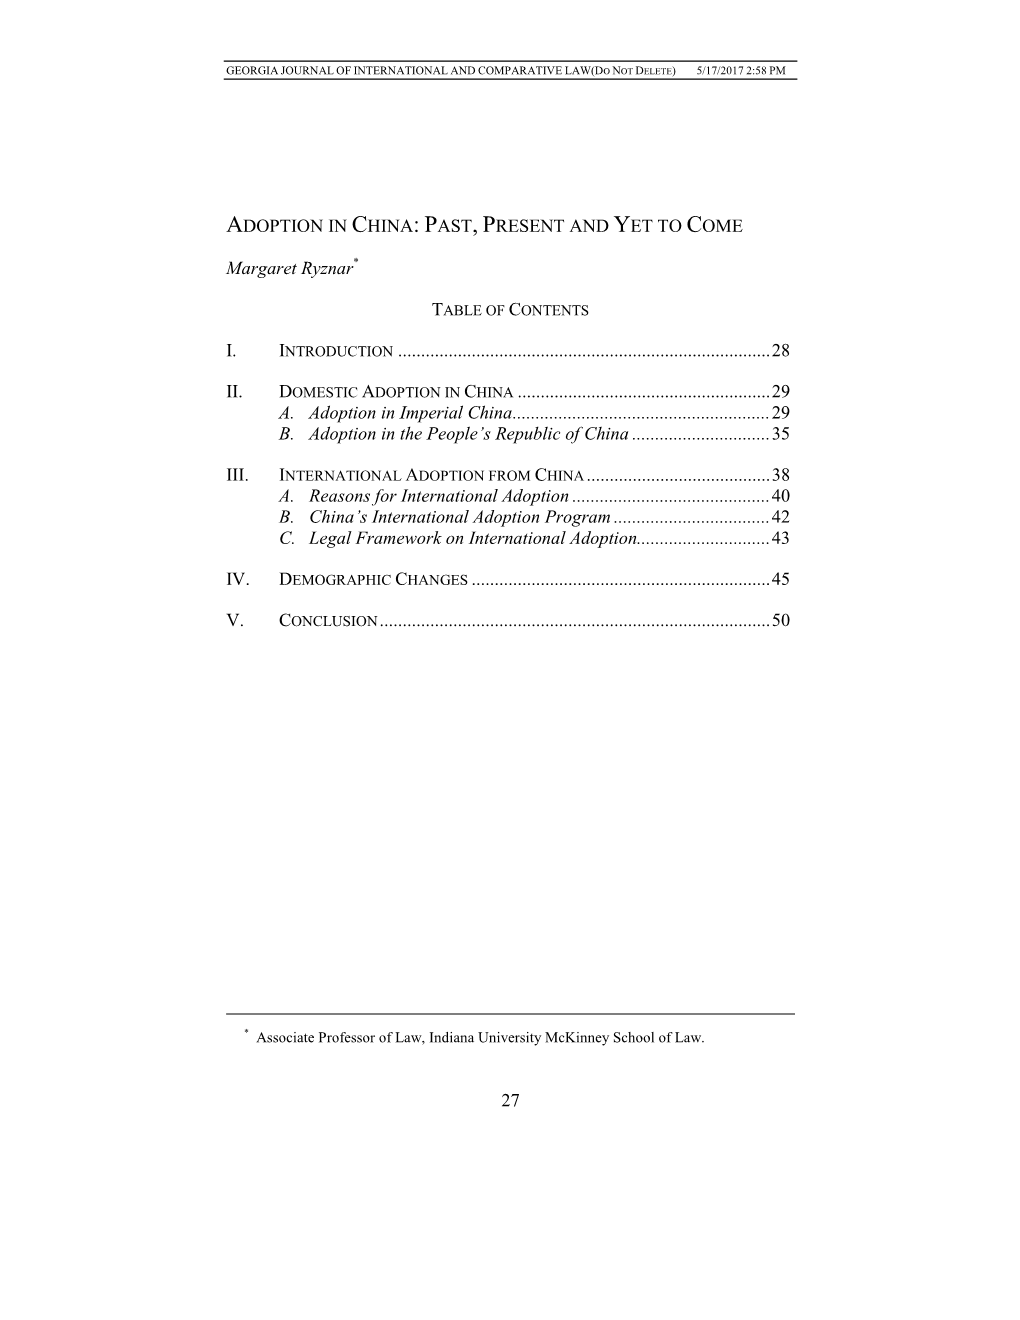 Adoption in China: Past, Present and Yet to Come